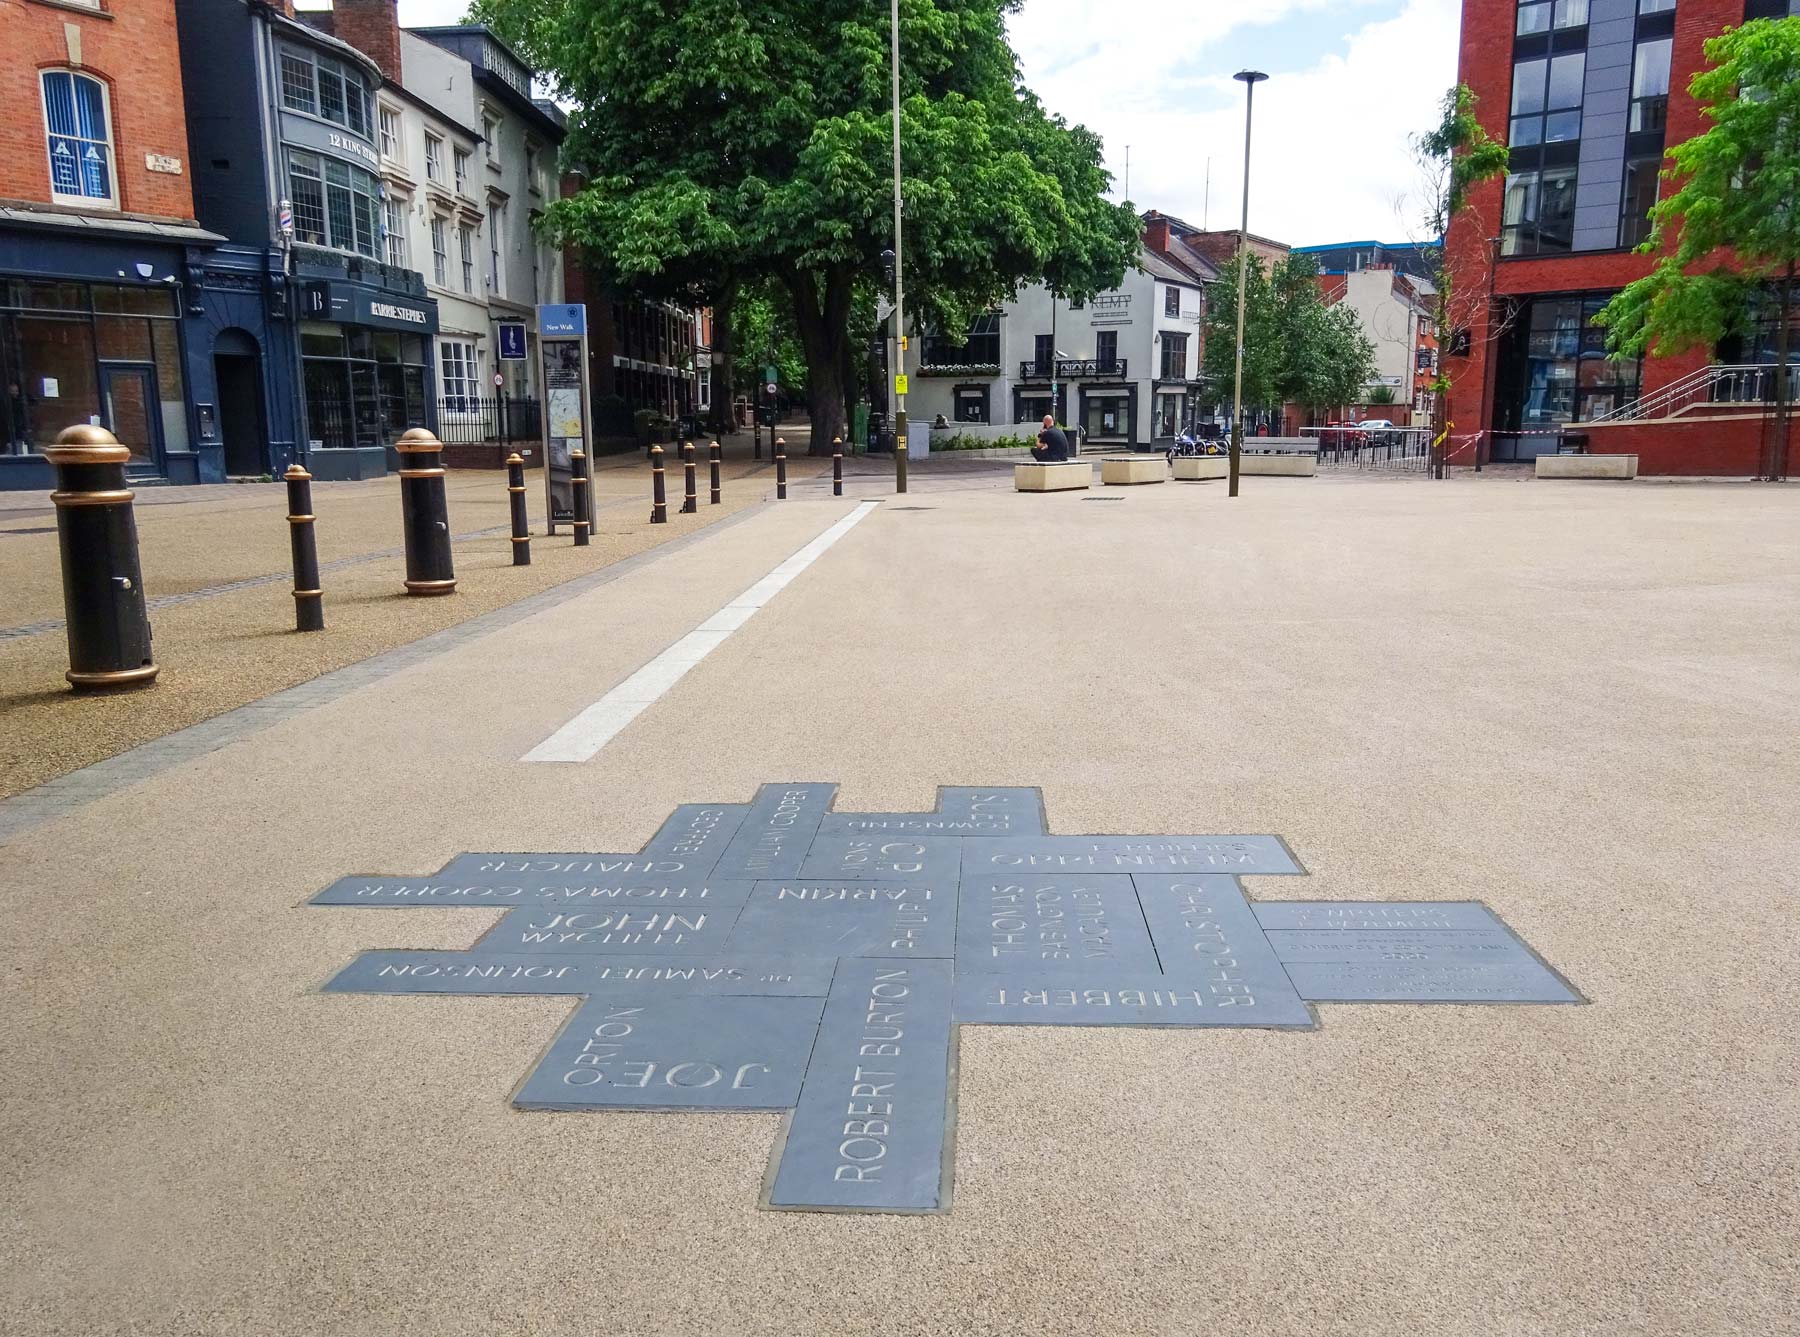 Photograph of The Writers' Pavement which is a stone carved typographic peice, embeded into the floor surfacing in the piaza, showing the bars on the left with the direction up New Walk to Upper New Walk in the distance